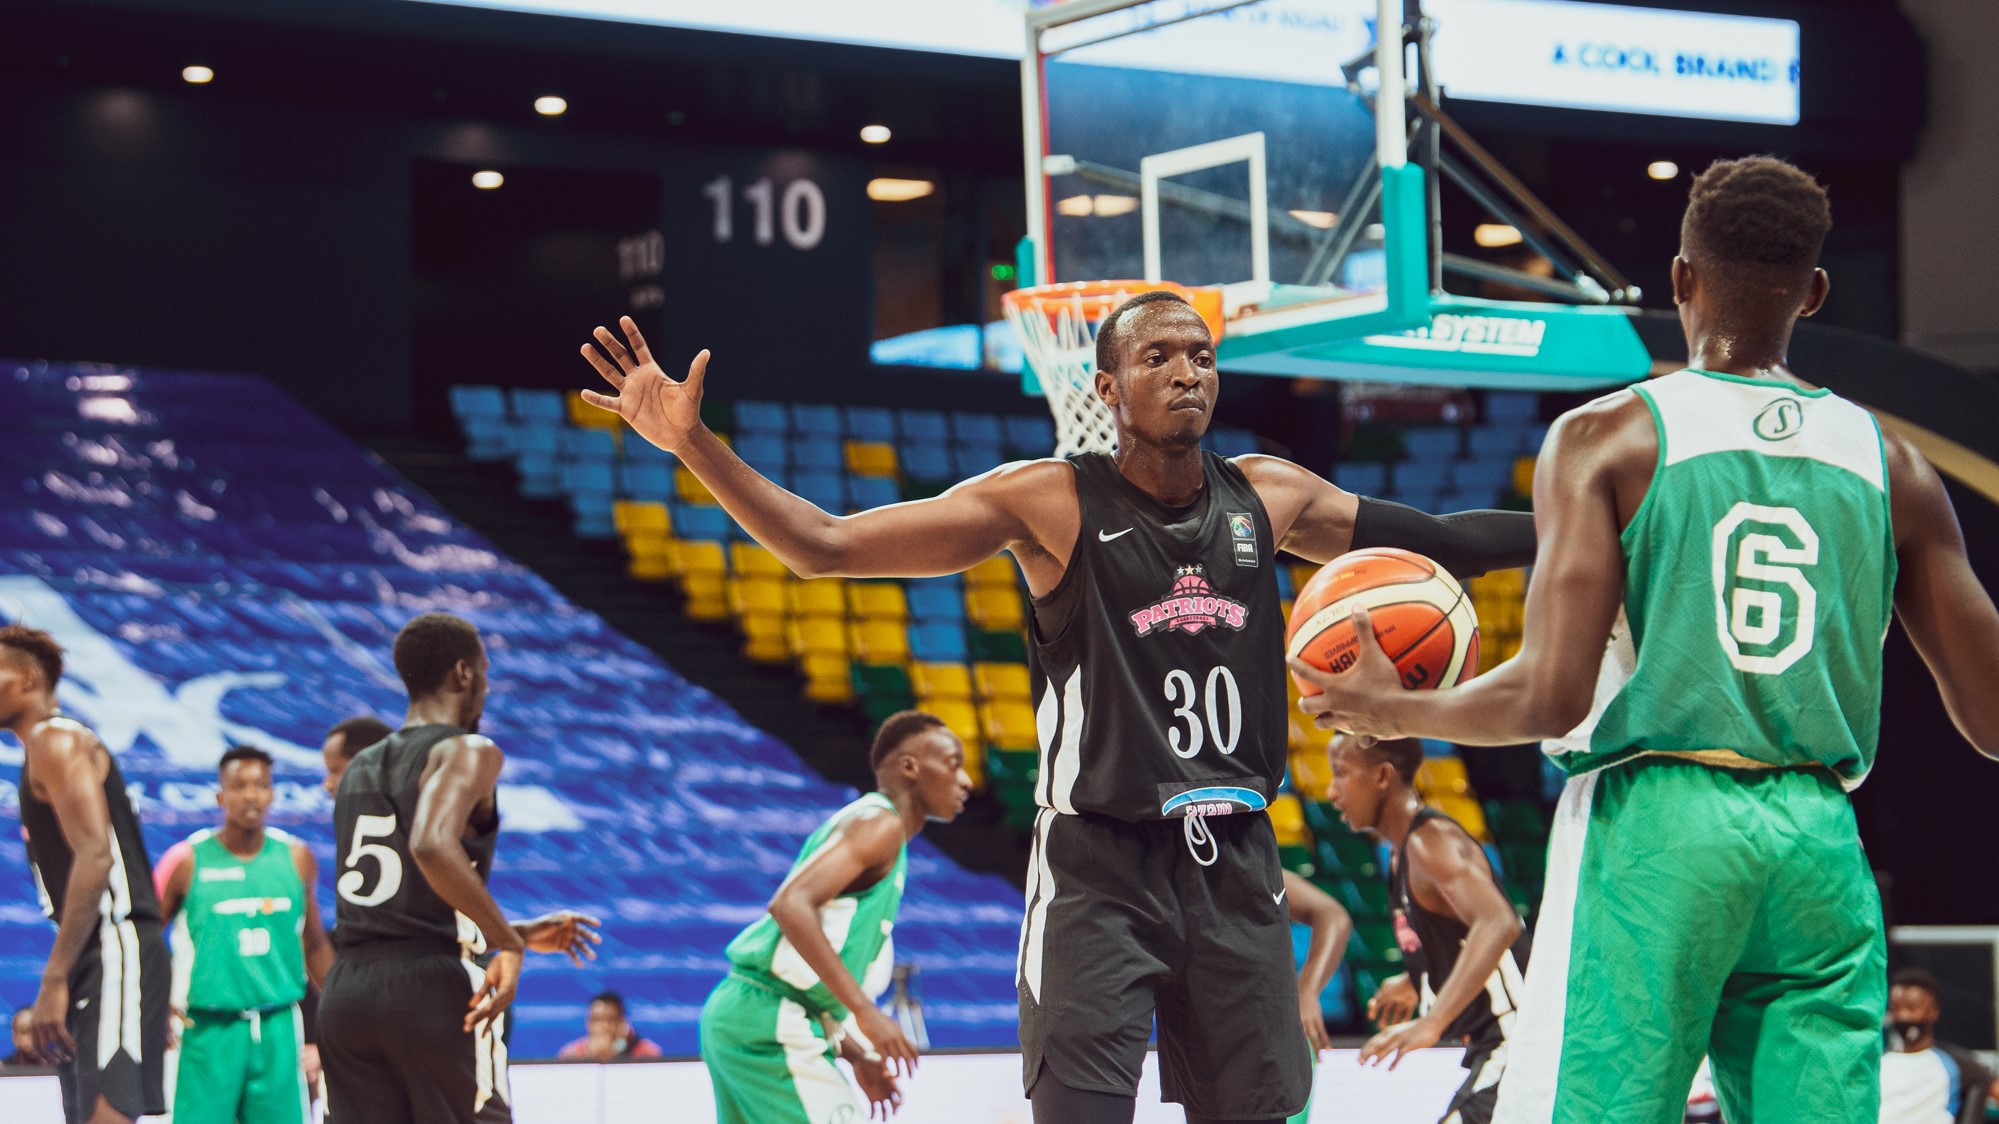 Dieudonnu00e9 Ndizeye, who scored a team-high 17 points on Sunday, is the reigning league MVP. / Courtesy photo